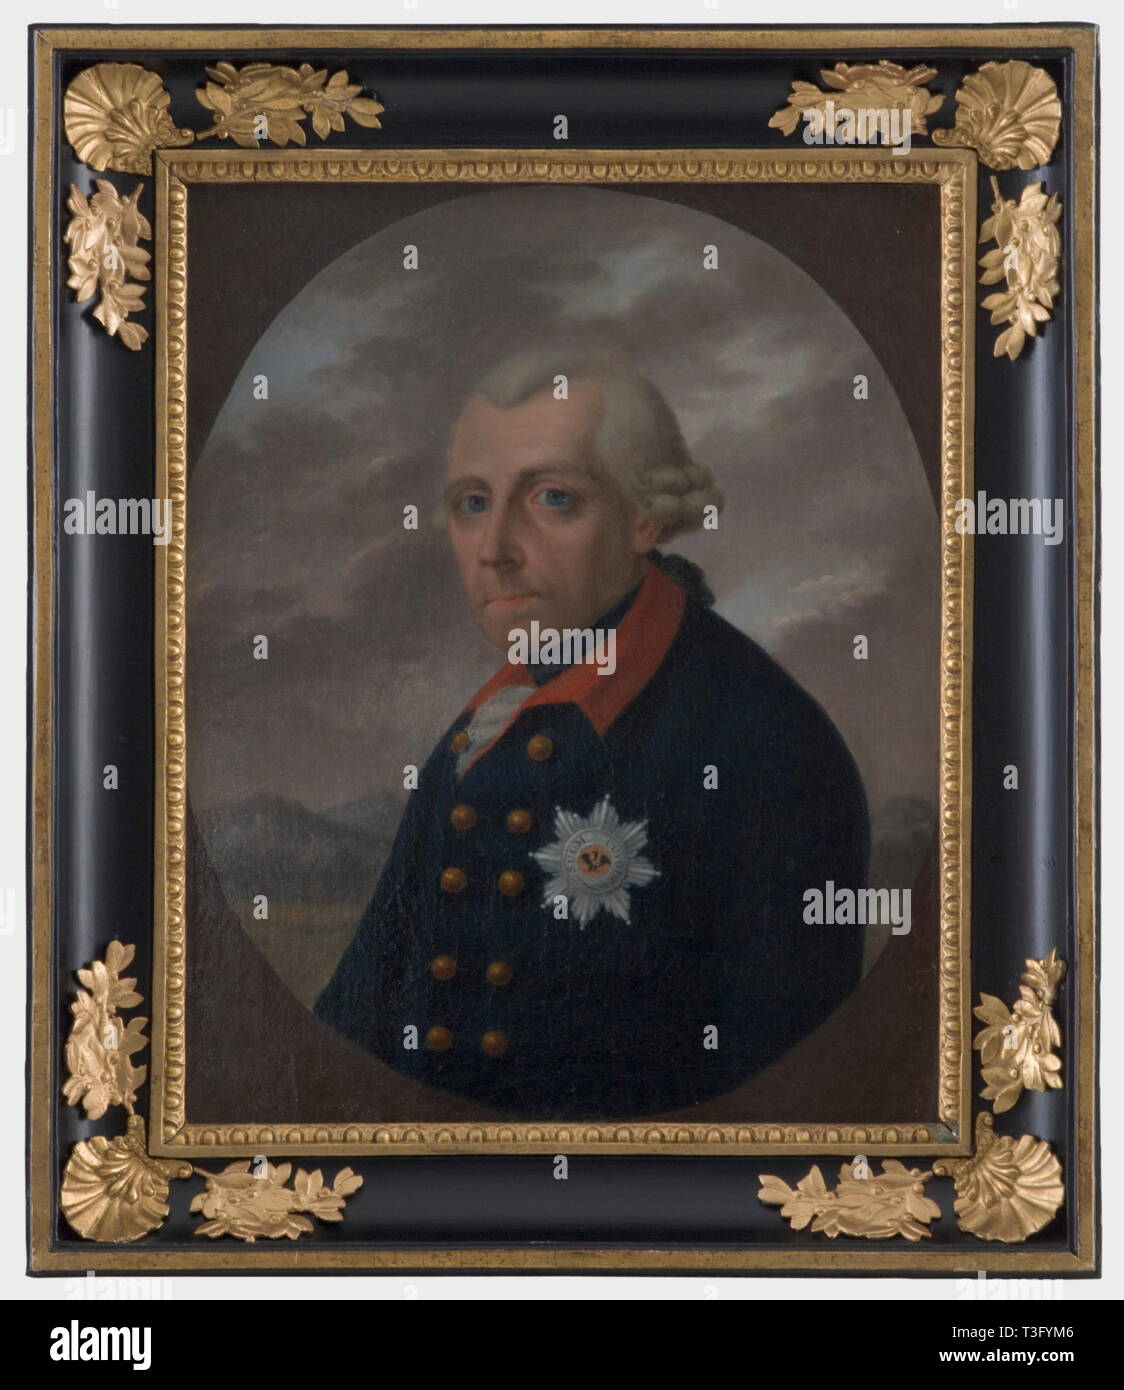 Frederic the Great (1712 - 1786), a portrait painting, circa 1780 Half portrait in the style of the portraits by Anton Graff, 1781. The King is wearing a plain blue uniform with red collar and the Star of the Order of the Black Eagle in front of an idealised mountain landscape. Oil on canvas. Picture dimensions 39 x 48 cm. Unsigned. In a heavily restored old frame, 53 x 62 cm. people, 18th century, Prussian, Prussia, German, Germany, militaria, military, object, objects, stills, clipping, clippings, cut out, cut-out, cut-outs, man, men, male, Additional-Rights-Clearance-Info-Not-Available Stock Photo